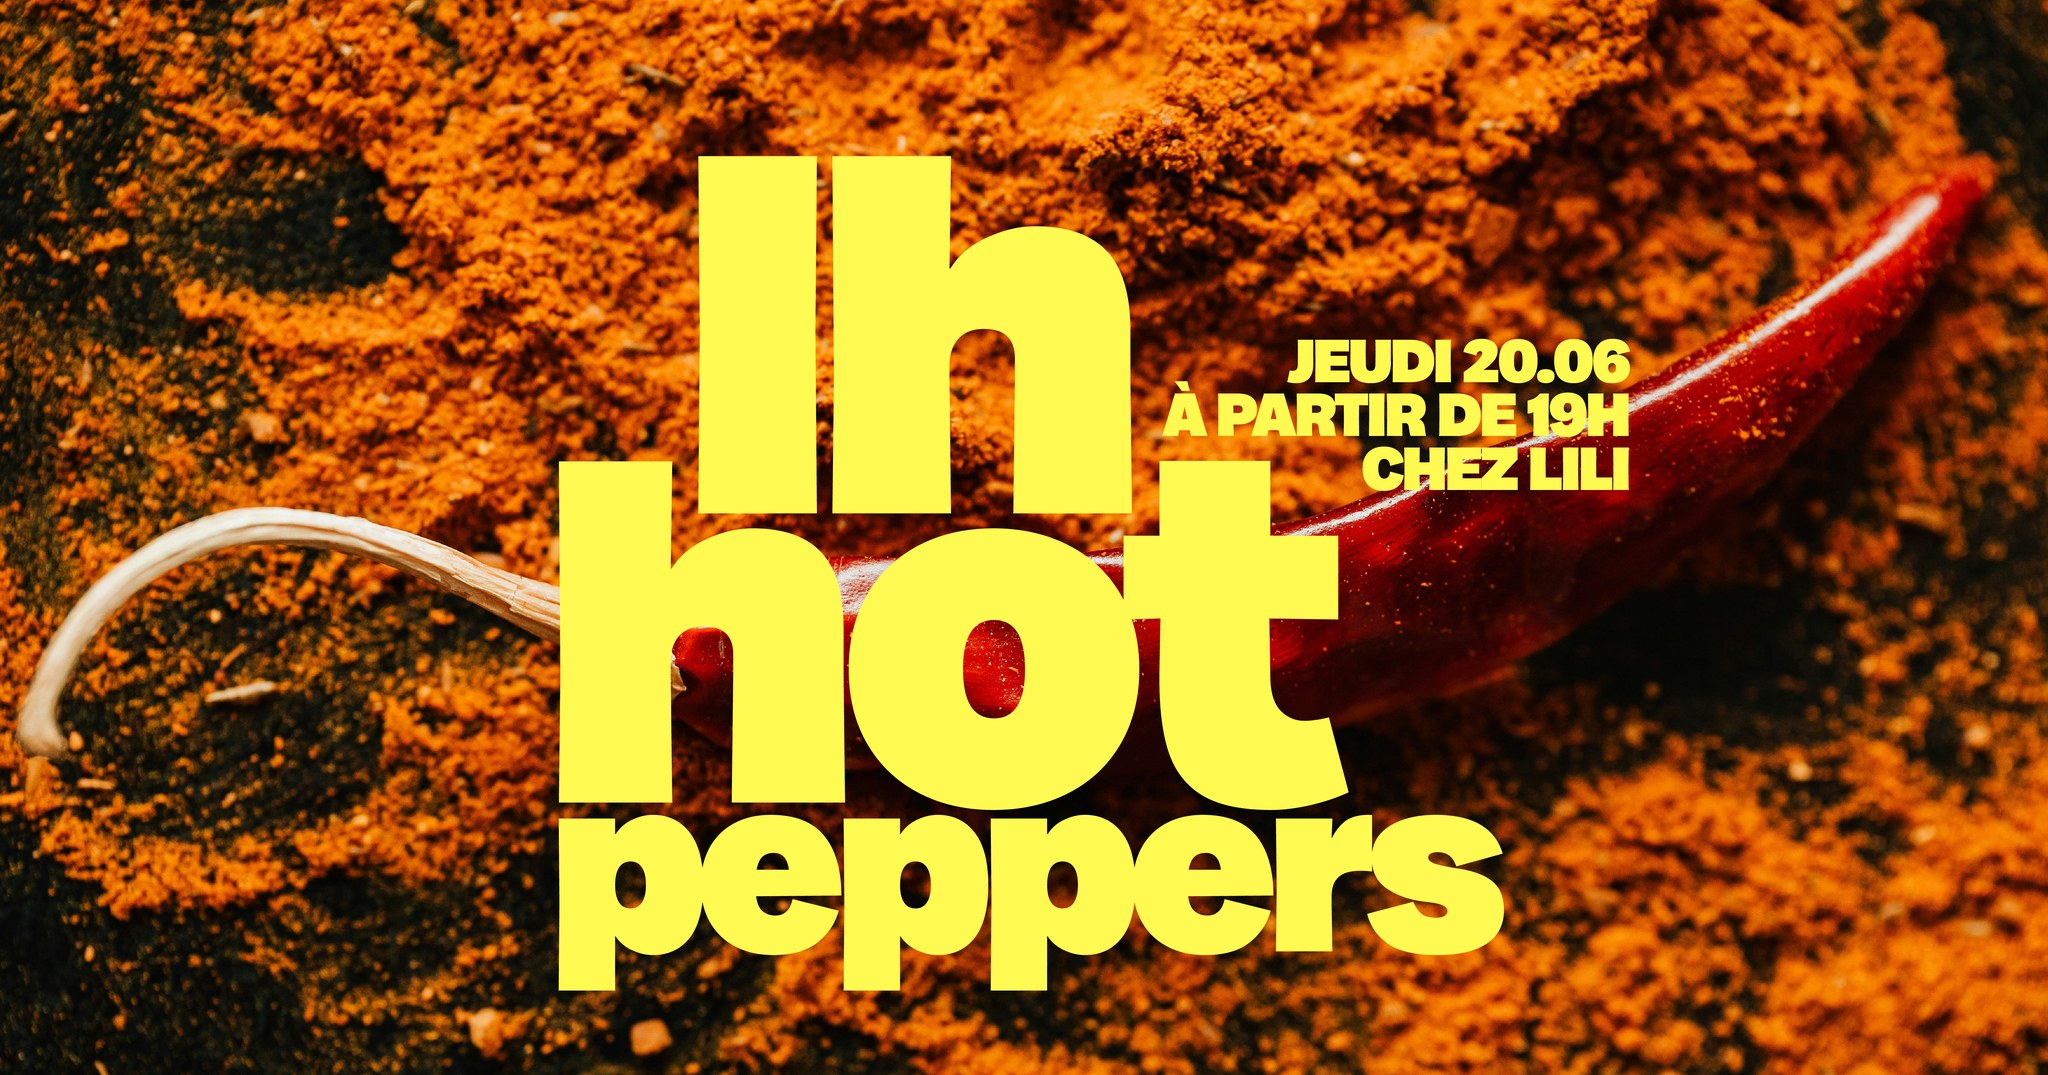 LH Hot Peppers